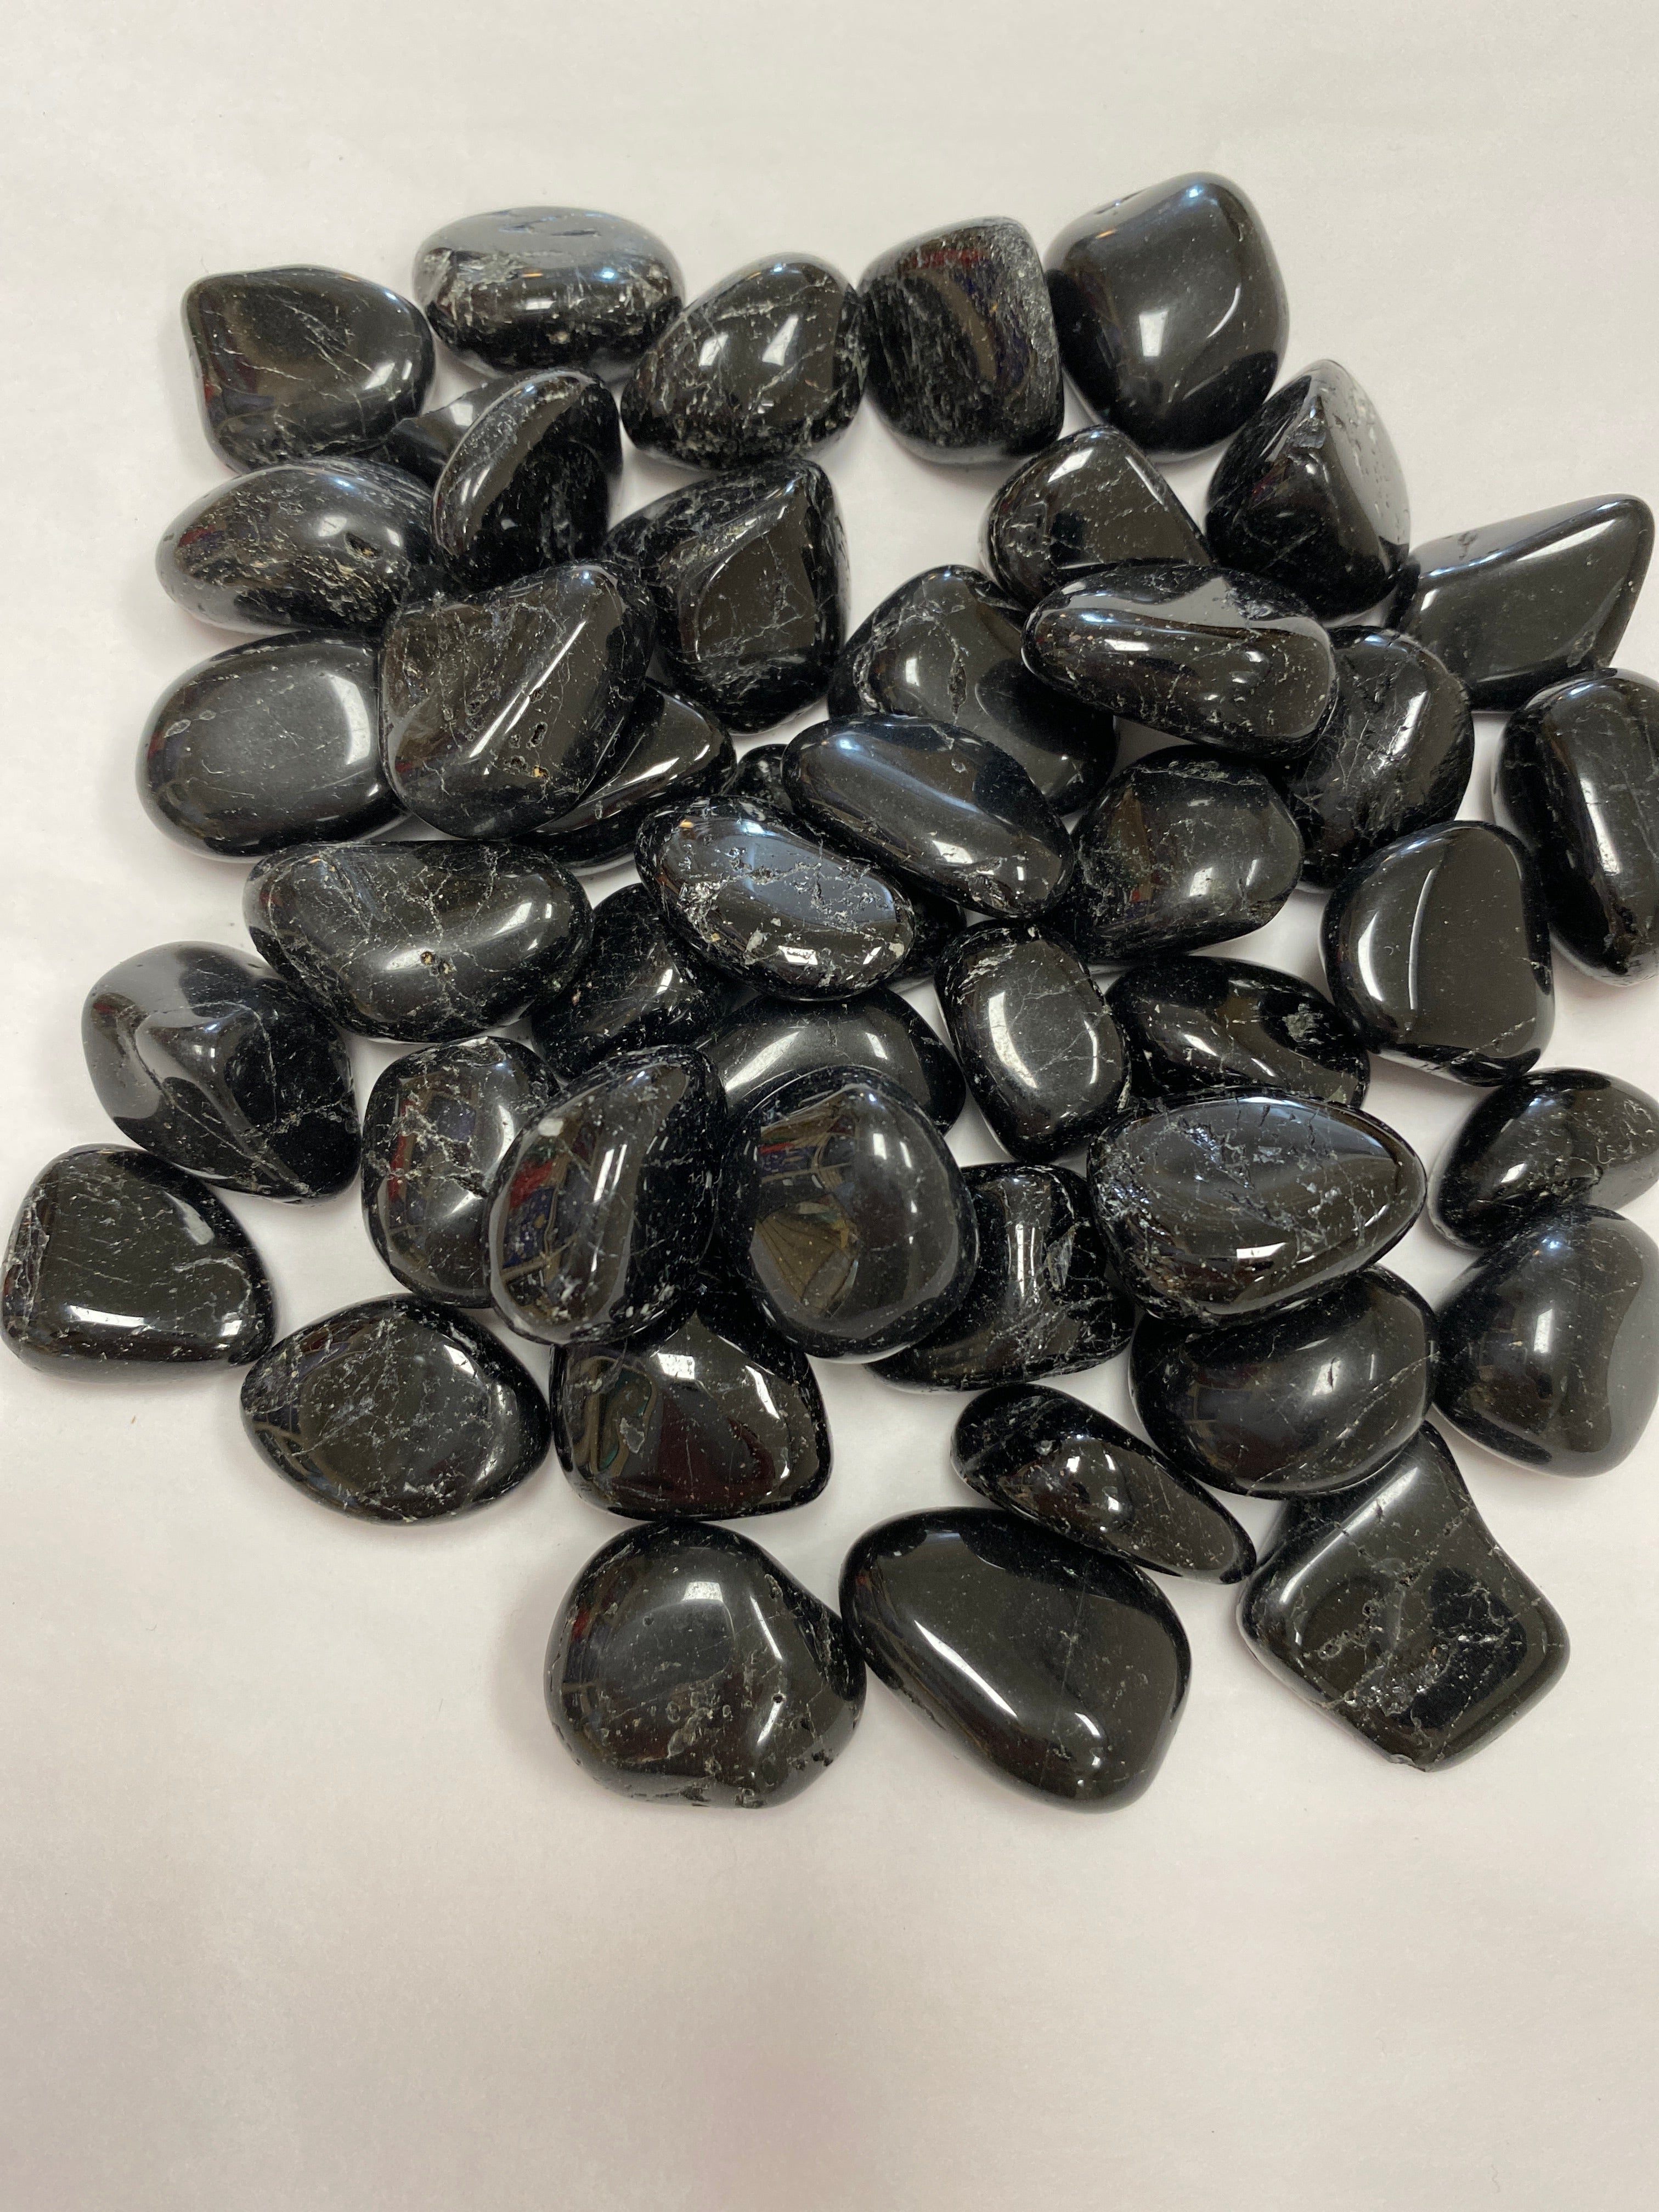 Smooth, black tumbled stone, known for protection, grounding, and negativity shielding.